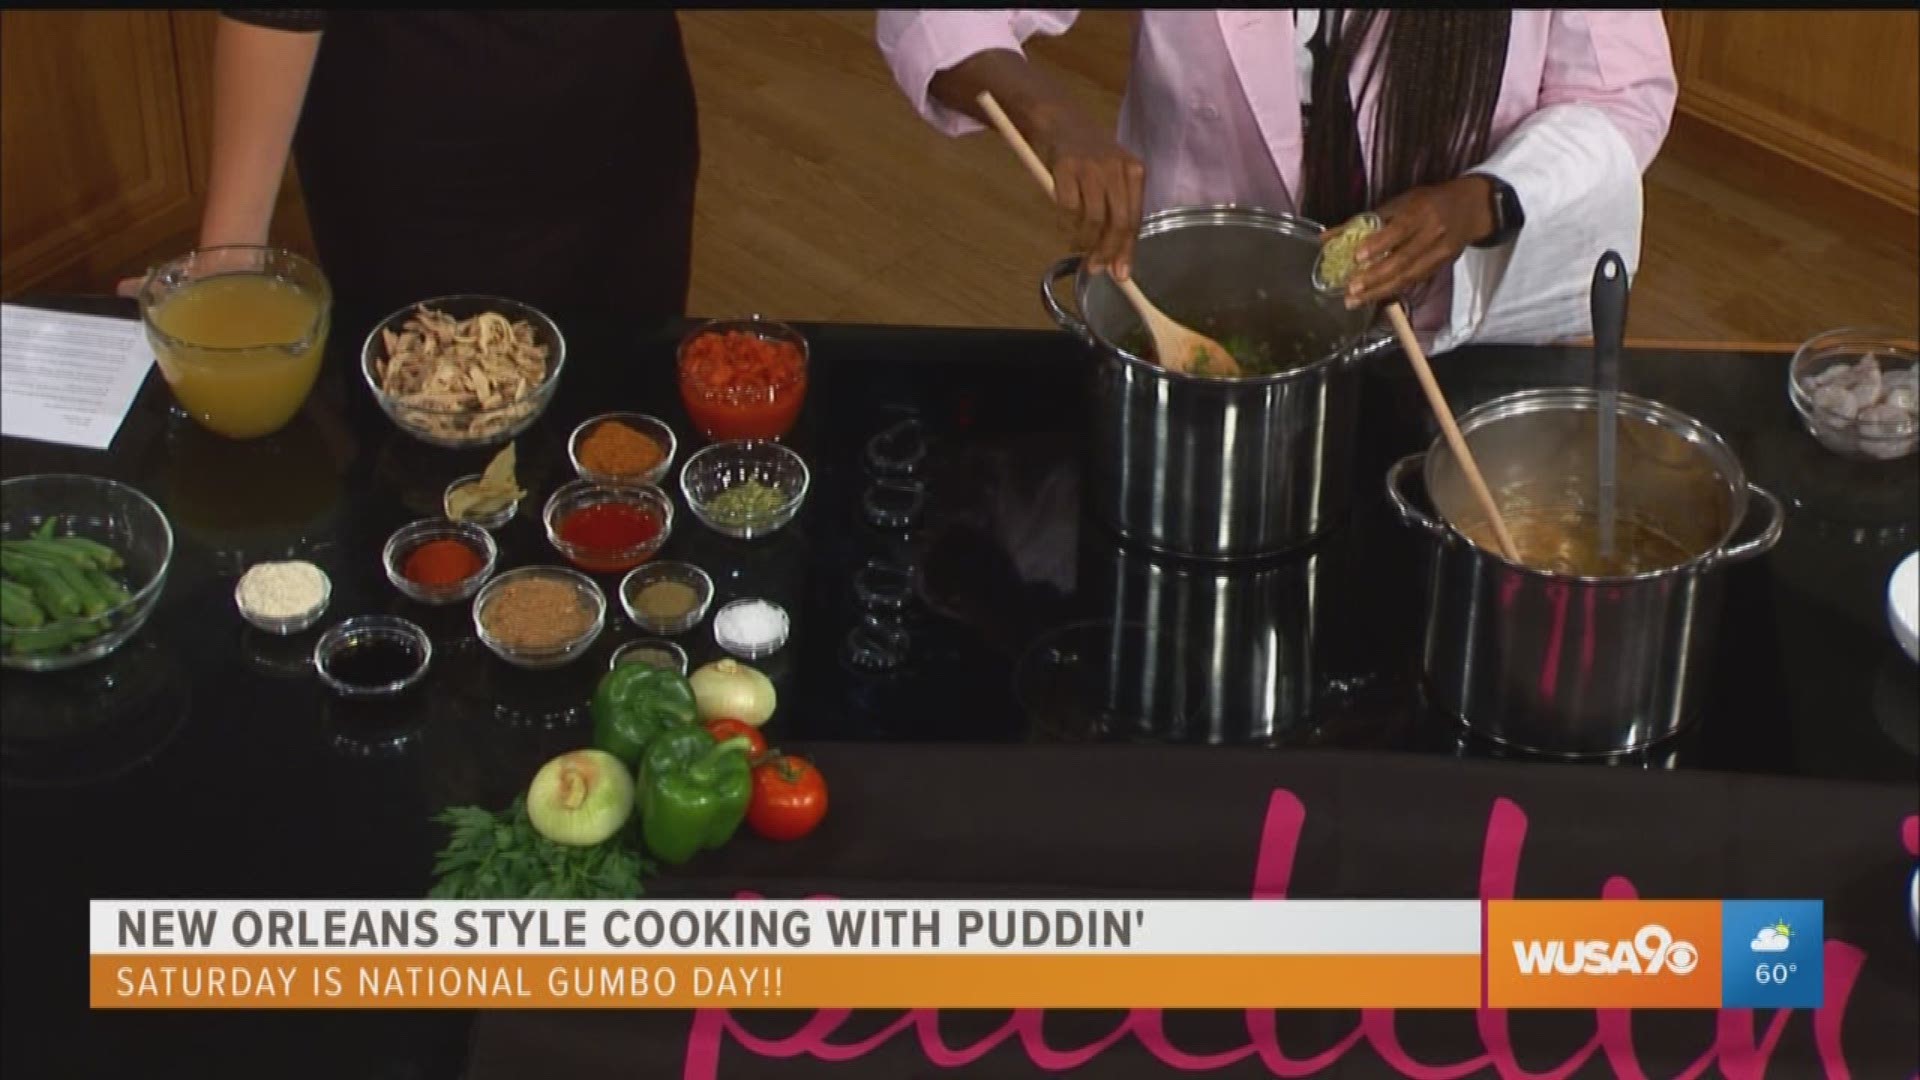 Toyin Alli of Puddin' shares a roux-less gumbo recipe to recreate for National Gumbo Day, this Saturday, Oct. 12, 2019. Find the full recipe on the Great Day website